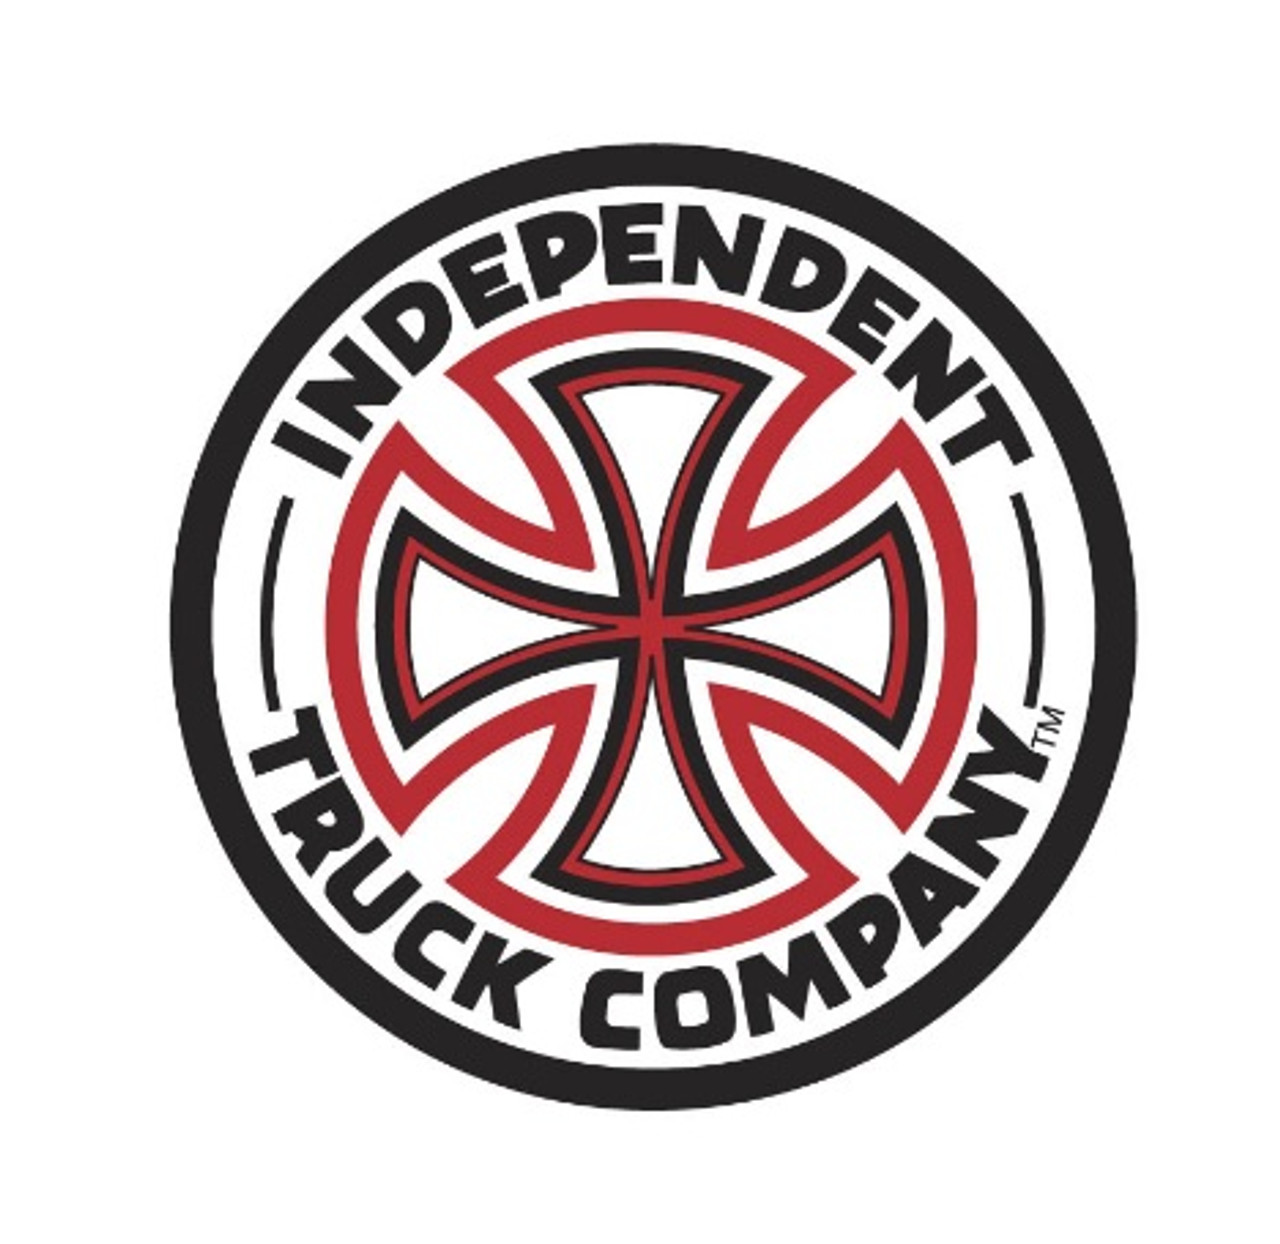 Independent Cross Circle Sticker White Red Black 3inch (2pack)